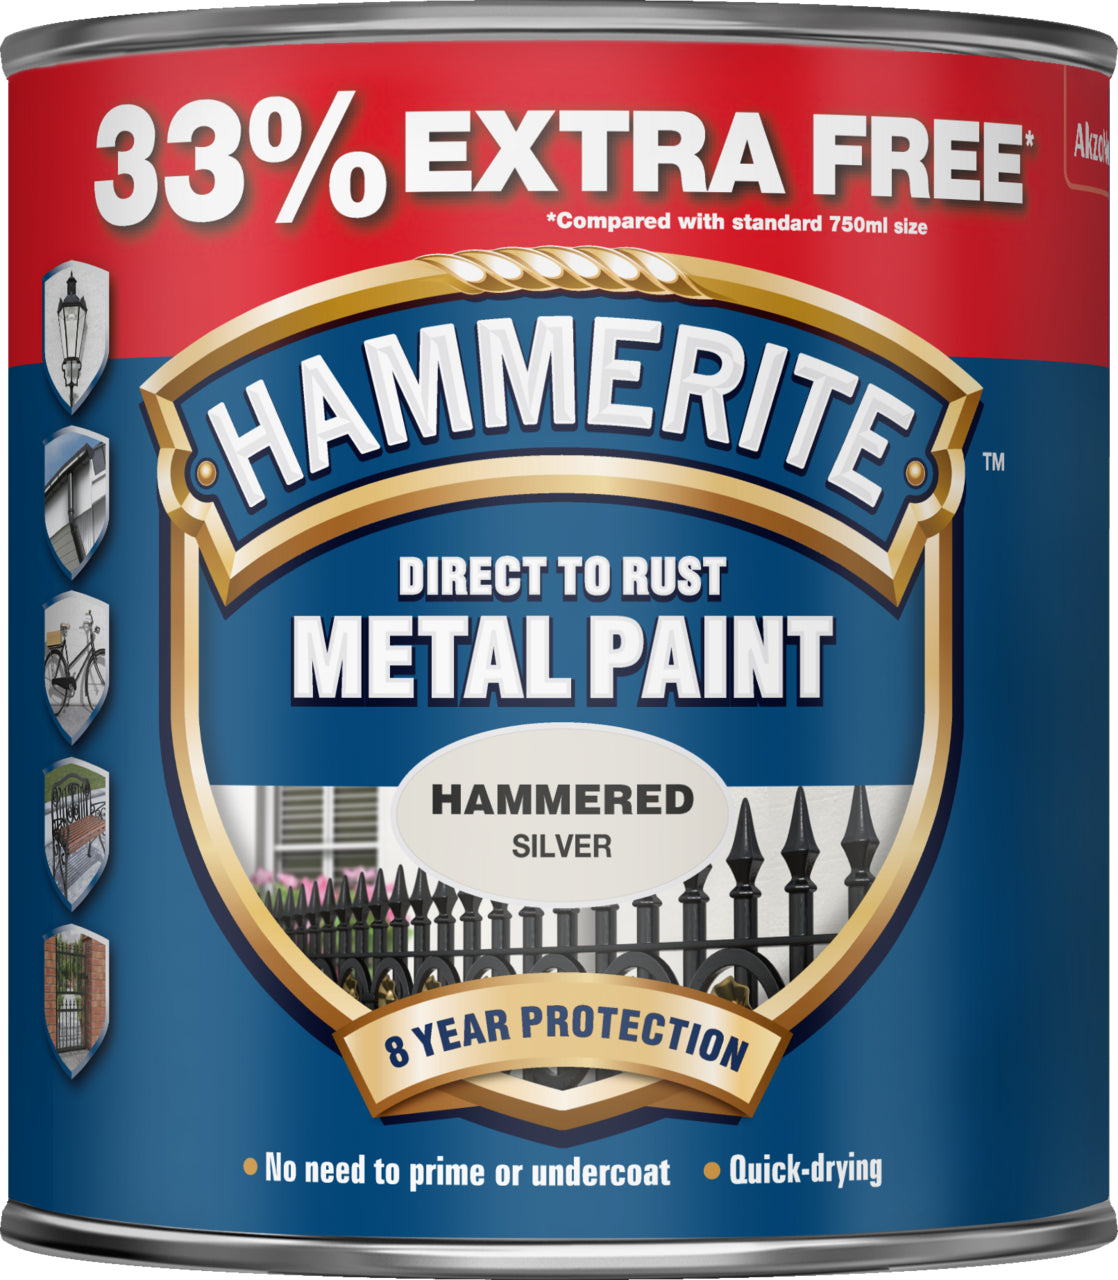 Hammerite Direct To Rust Metal Paint Hammered Finish 1L